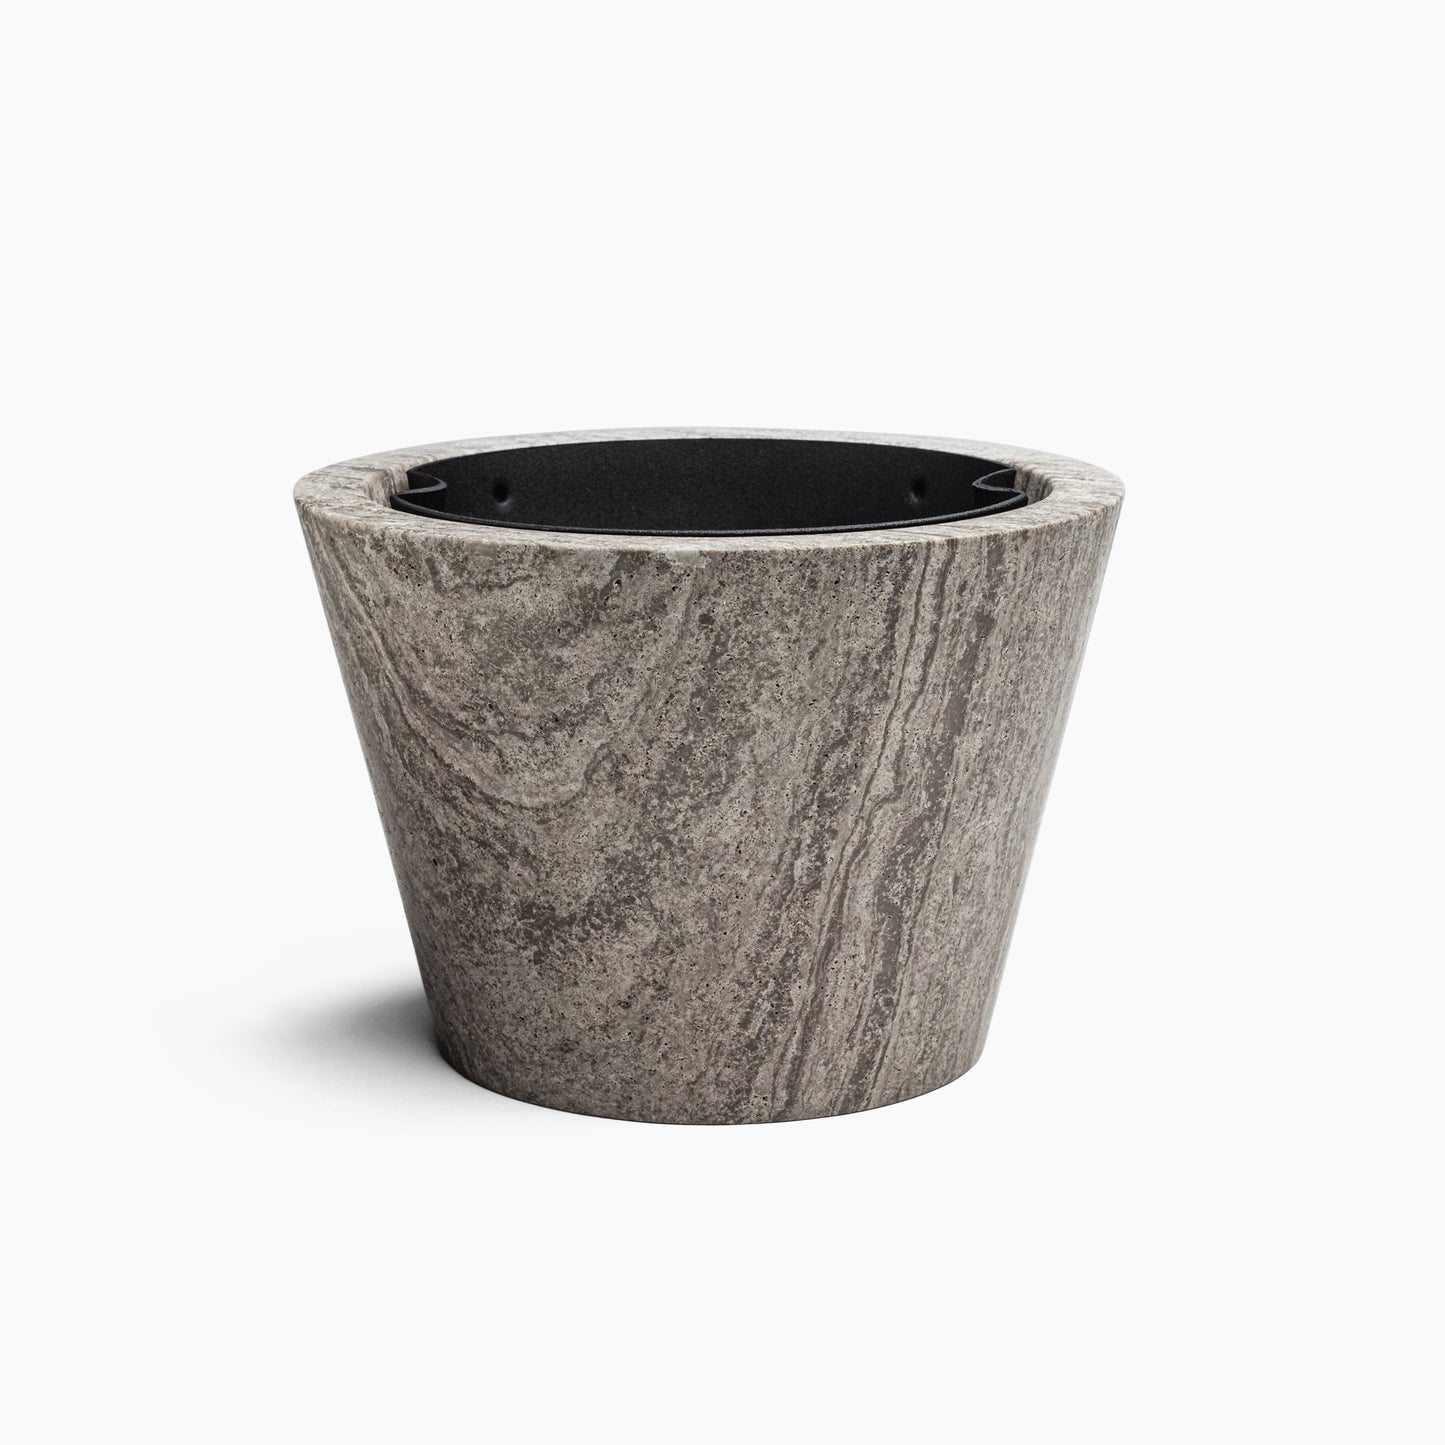 MEDIUM ORCHID POT IN GREY ATHENS MARBLE